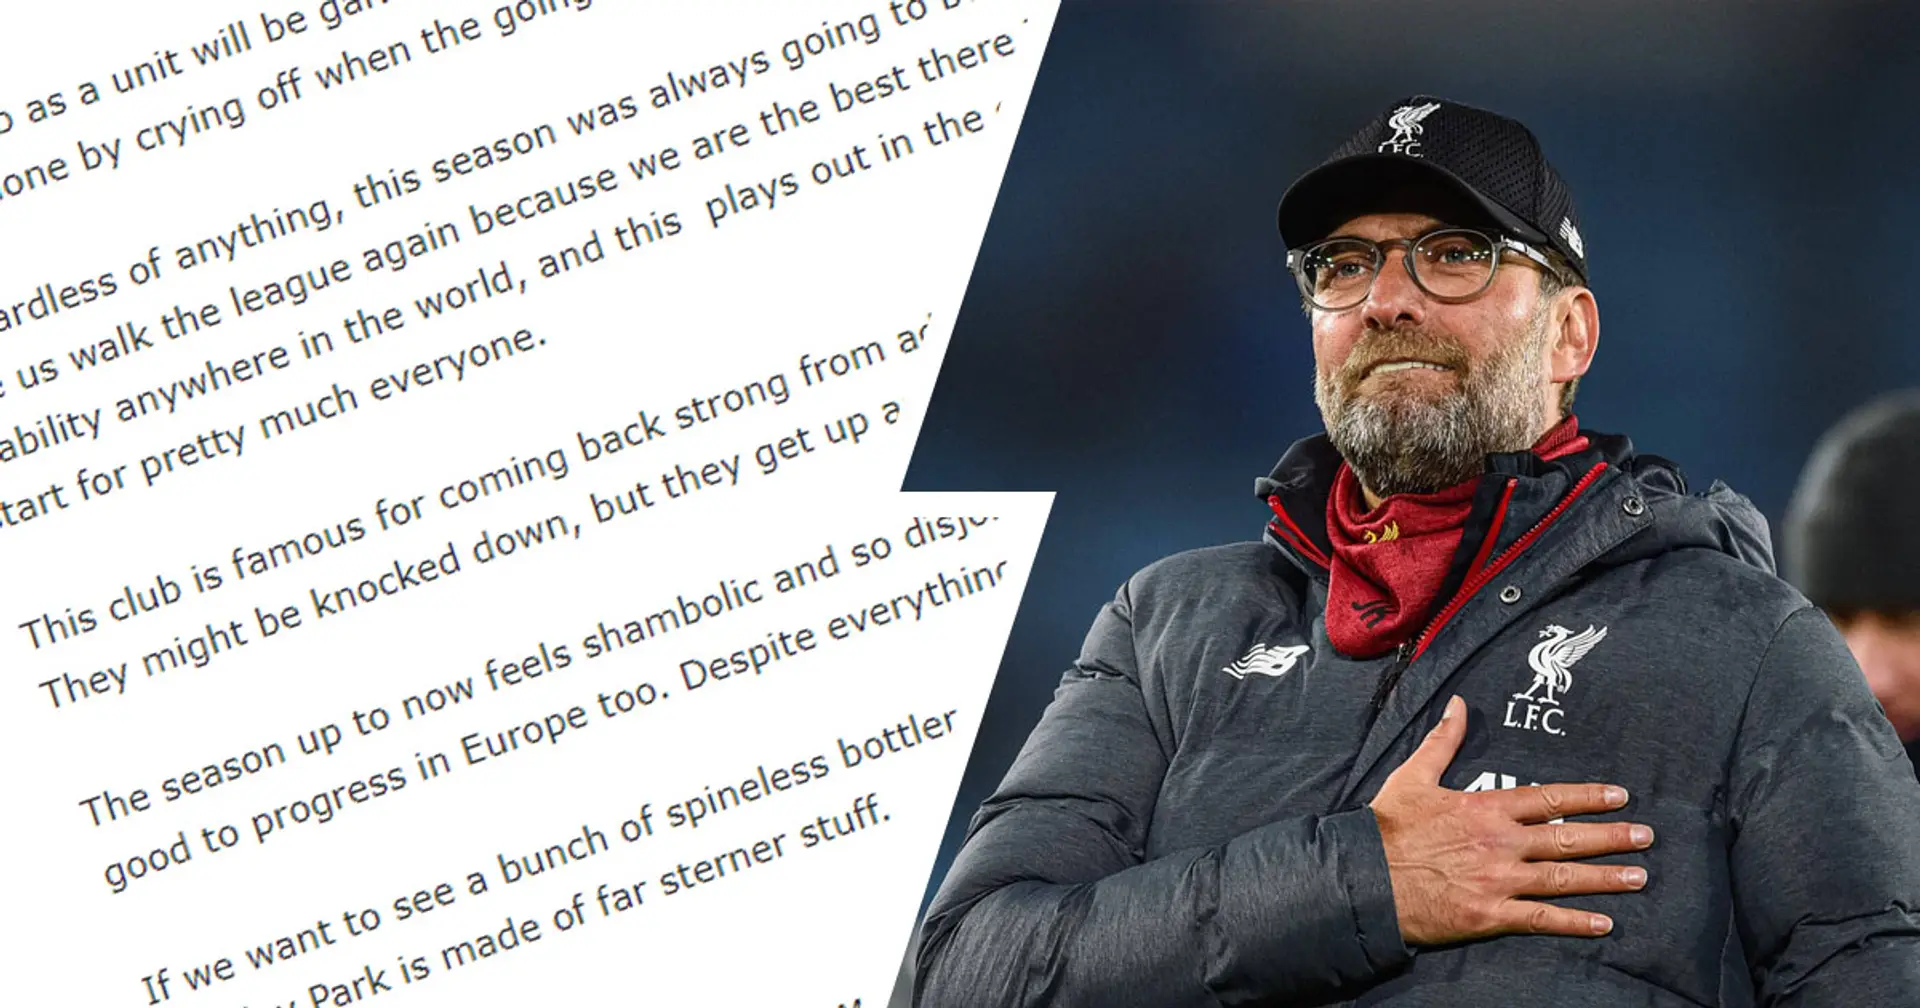 'Liverpool as a unit will be galvanised by recent events, not demoralised': LFC fan adamant tough times will make Reds even stronger